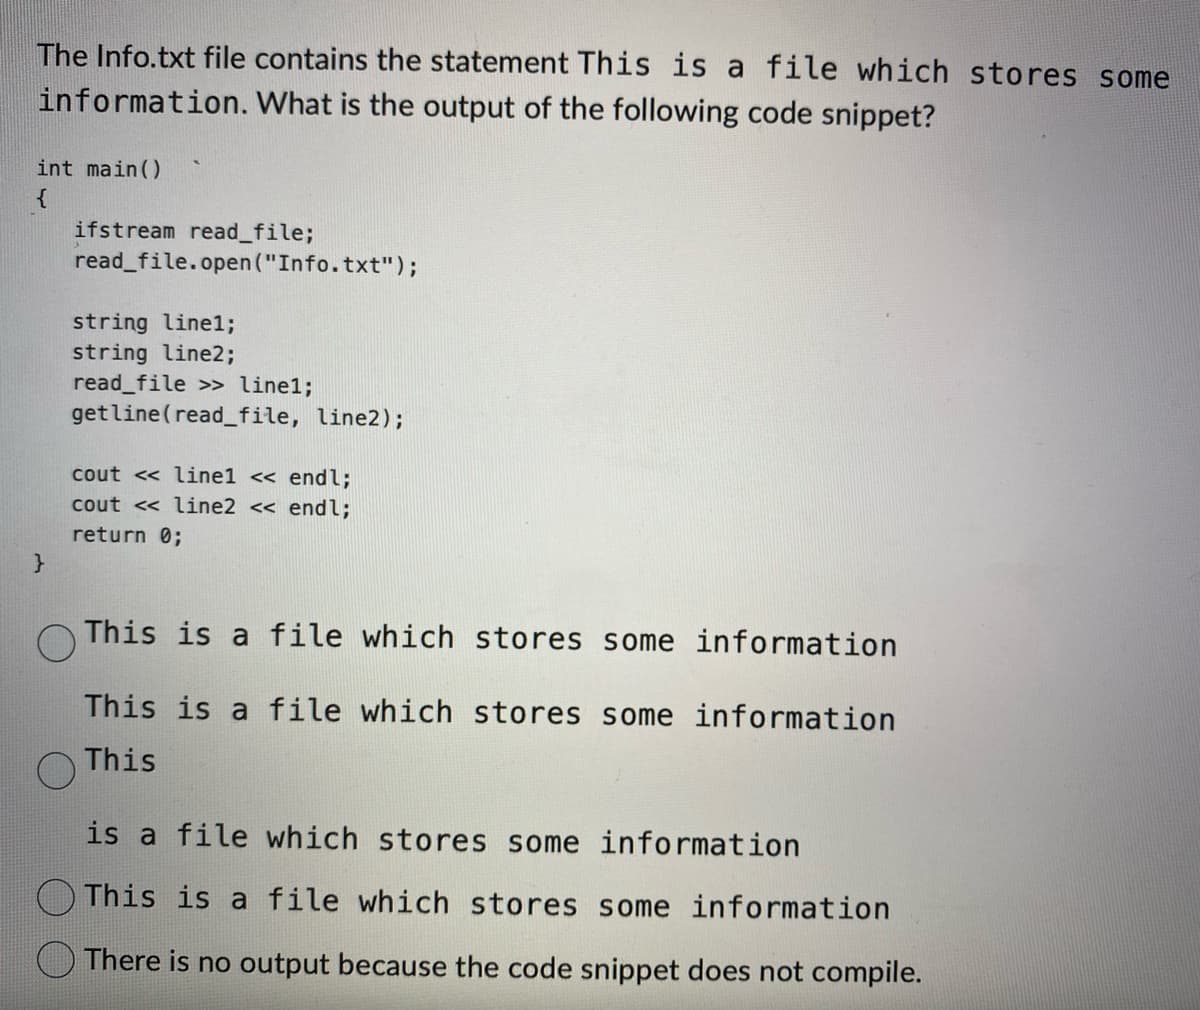 The Info.txt file contains the statement This is a file which stores some
information. What is the output of the following code snippet?
int main()
{
}
ifstream read_file;
read_file.open("Info.txt");
string linel;
string line2;
read_file >> linel;
get line (read_file, line2);
cout << linel << endl;
cout << line2 << endl;
return 0;
This is a file which stores some information
This is a file which stores some information
This
is a file which stores some information
This is a file which stores some information
There is no output because the code snippet does not compile.